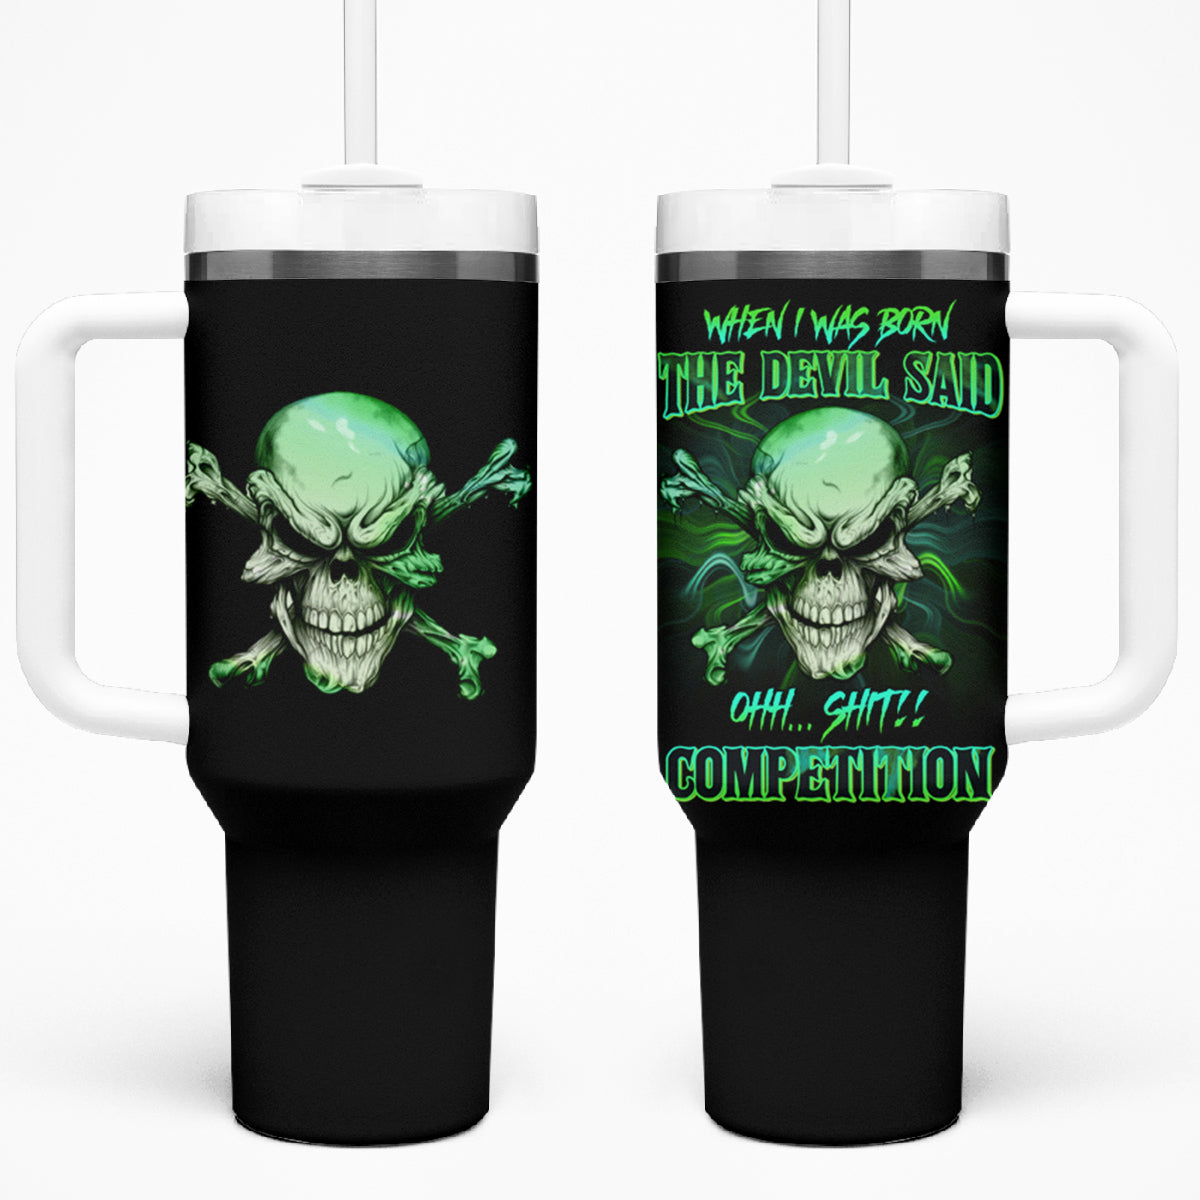 When I Was Born Mad Skull Tumbler With Handle